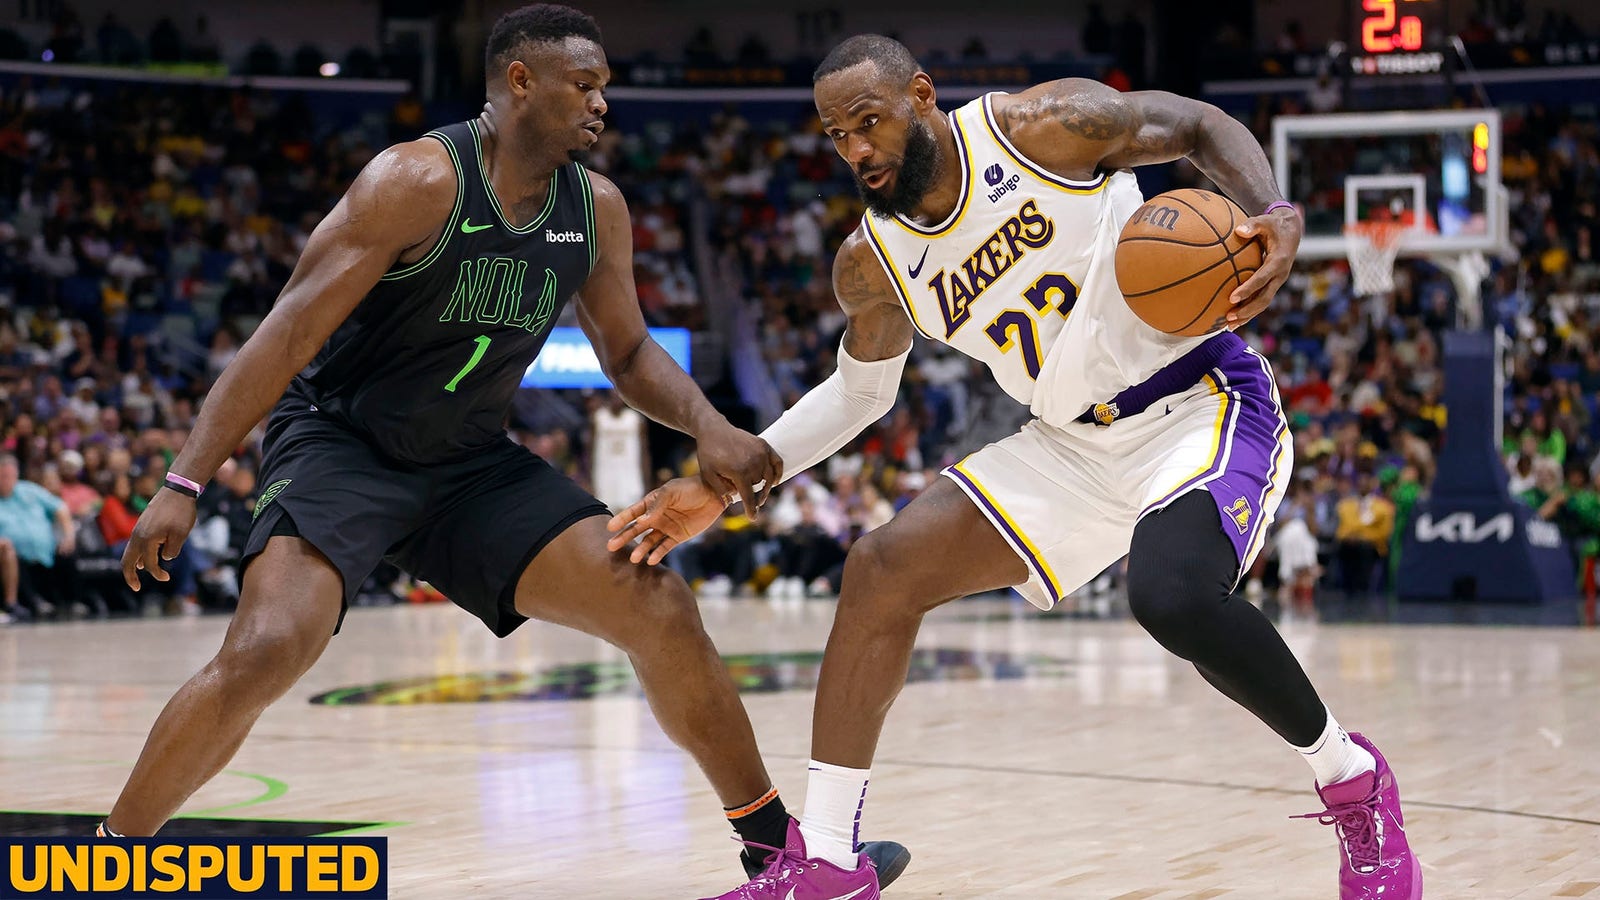 LeBron, Lakers will face Zion, Pelicans in NBA play-in tournament